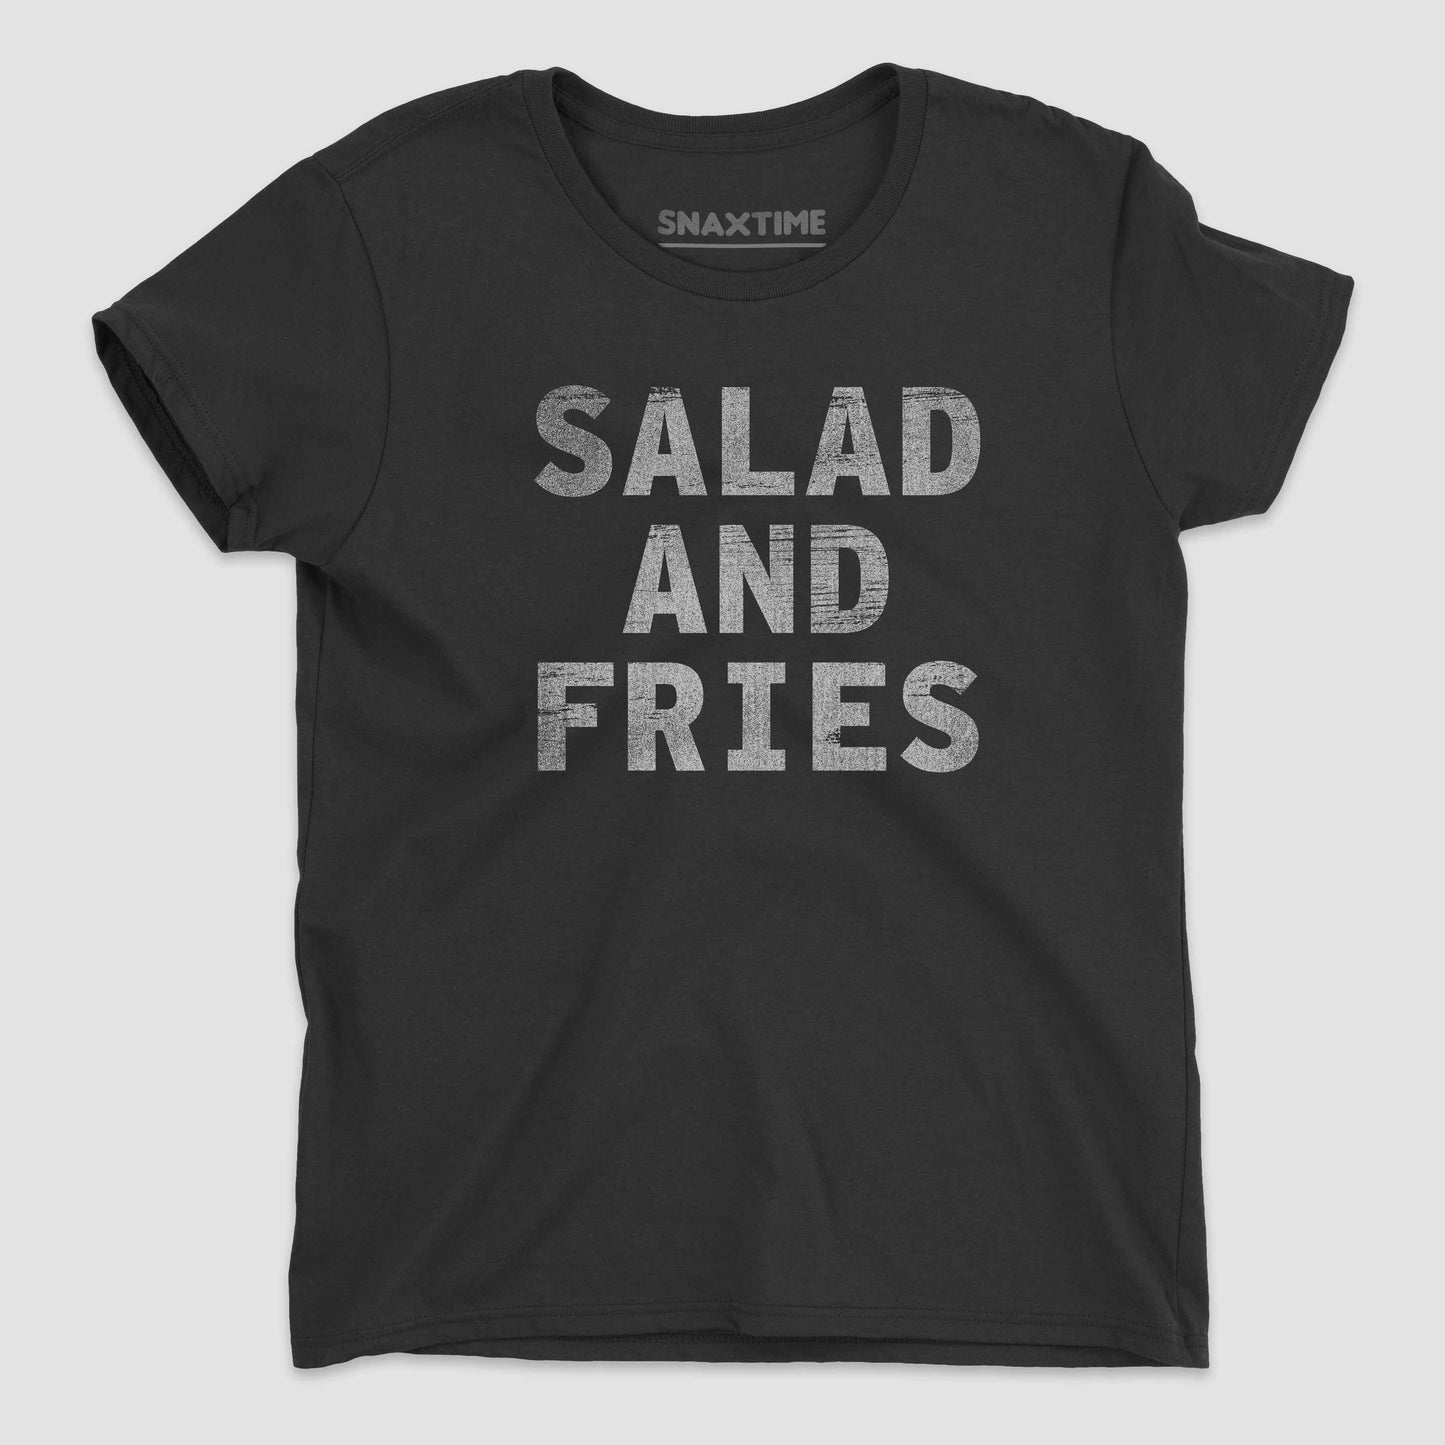 Black Salad and Fries Women's Graphic T-Shirt by Snaxtime